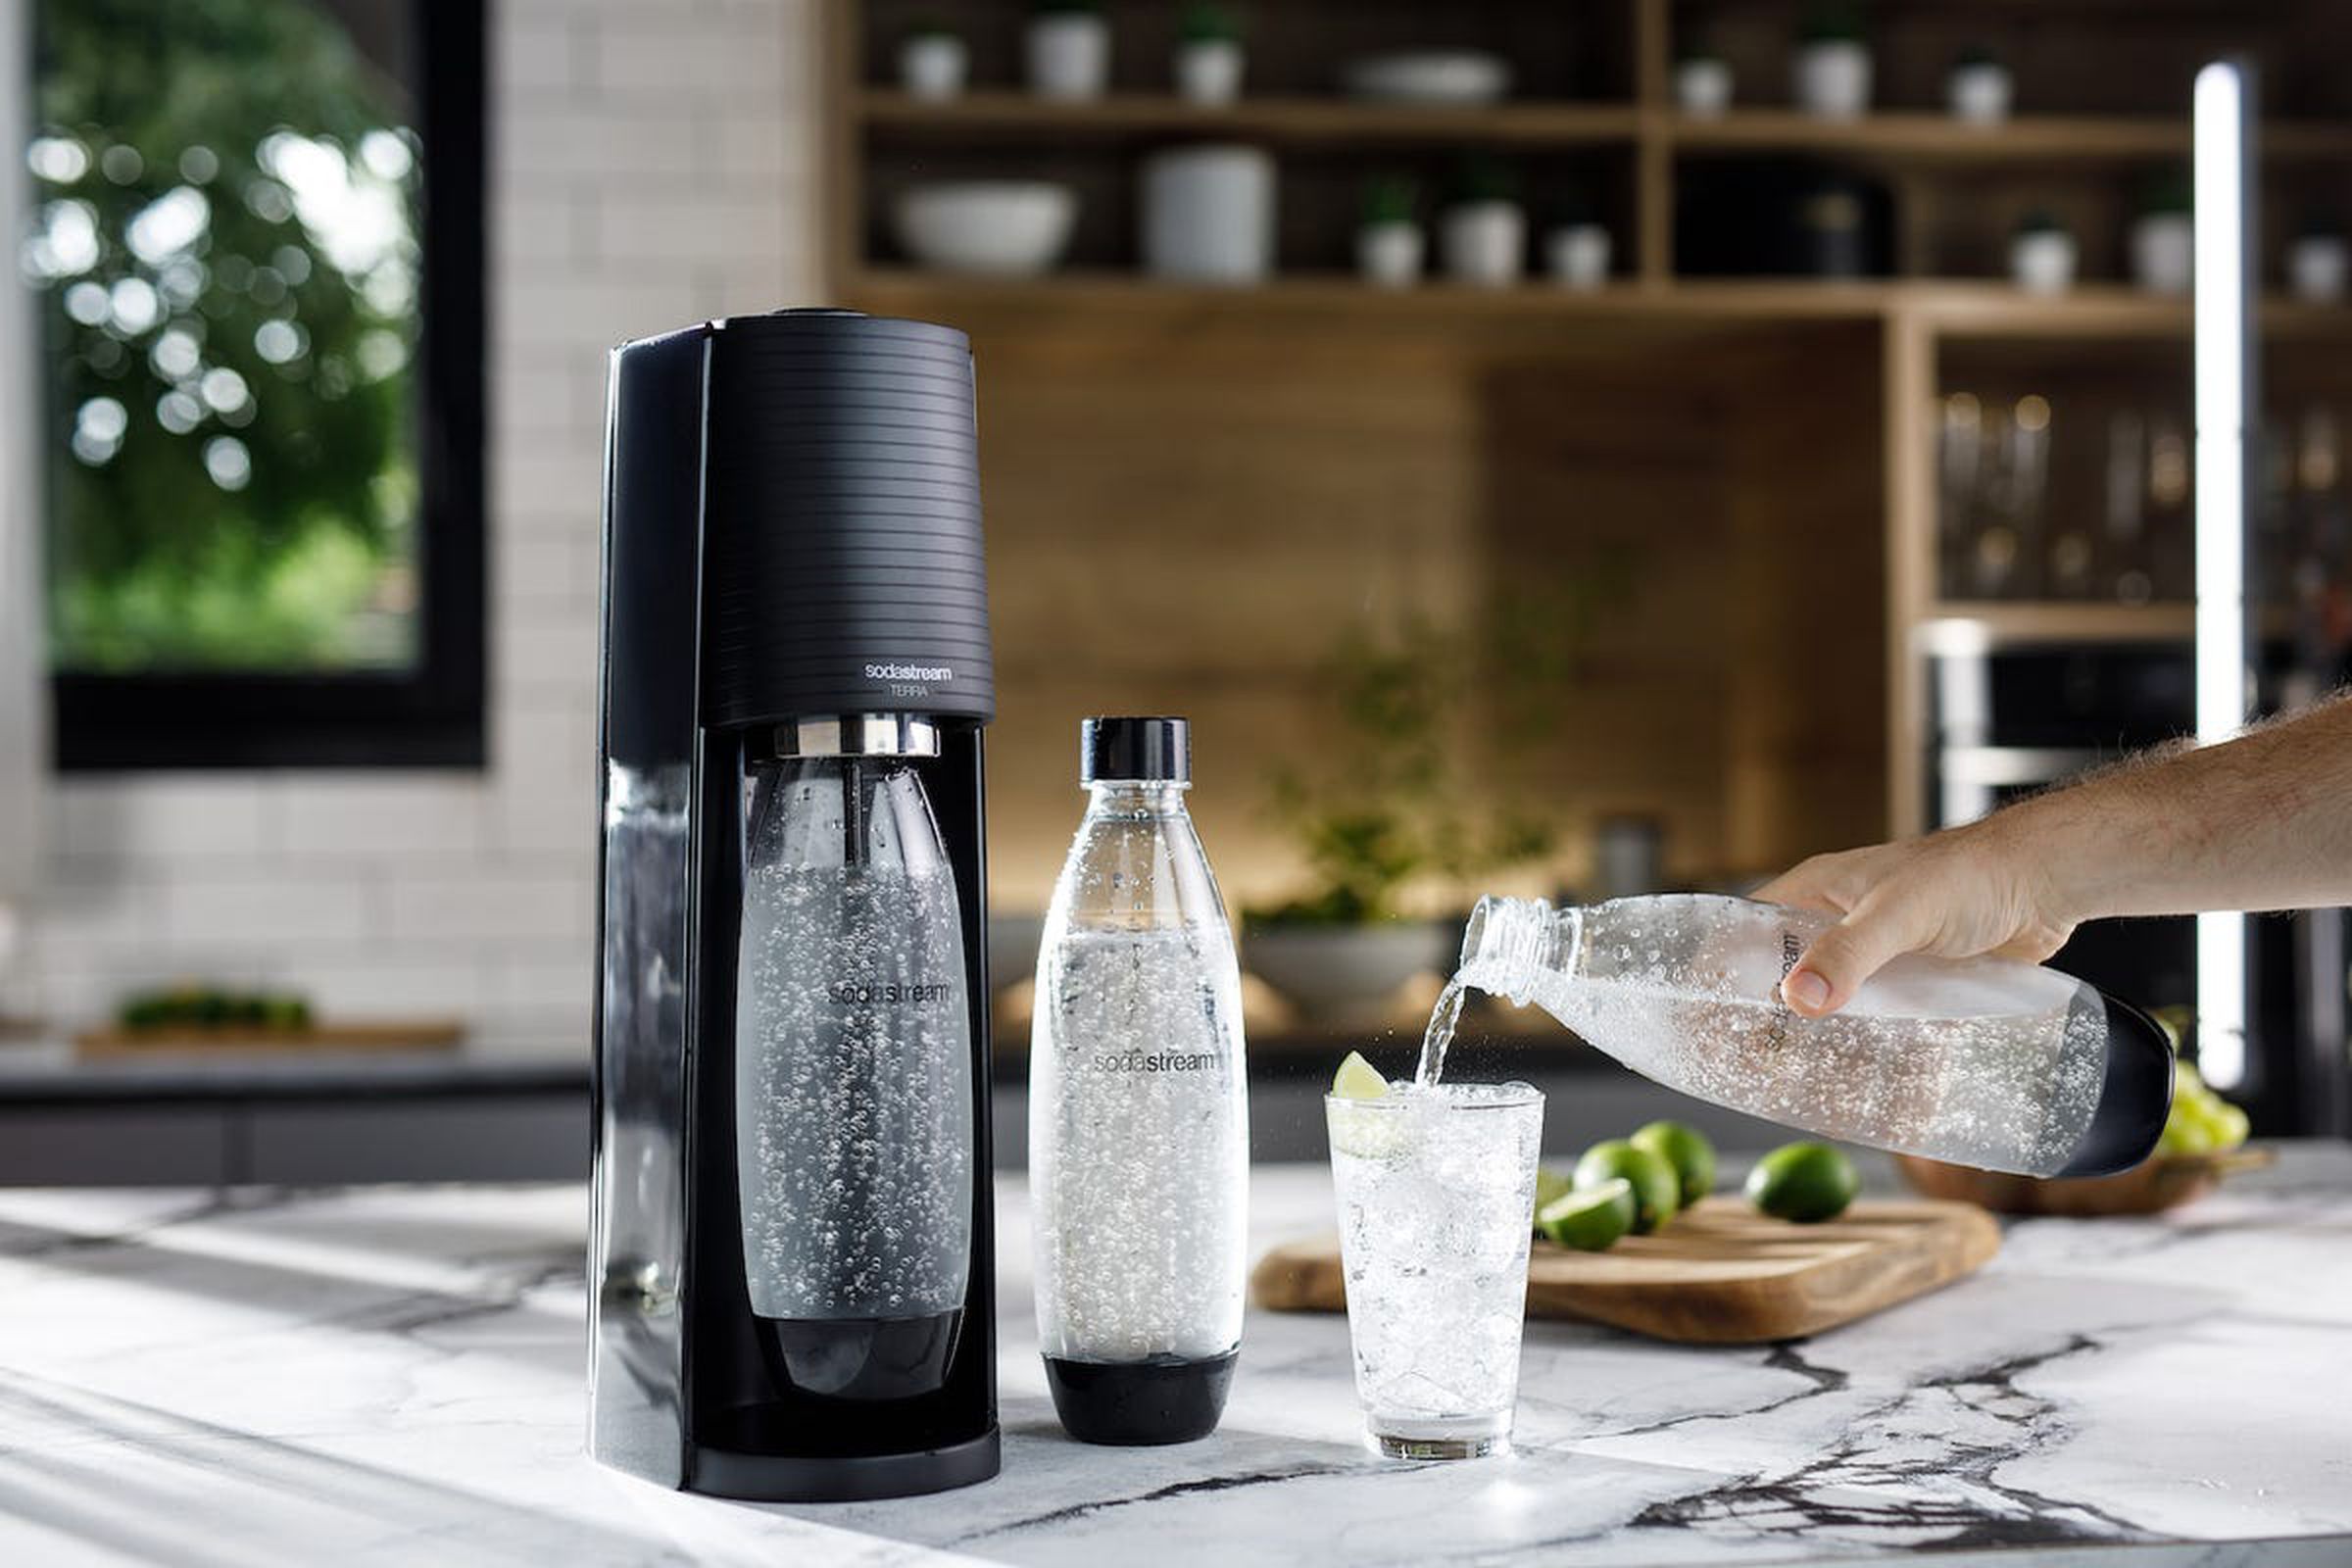 An image of a SodaStream and glass of sparkling water.